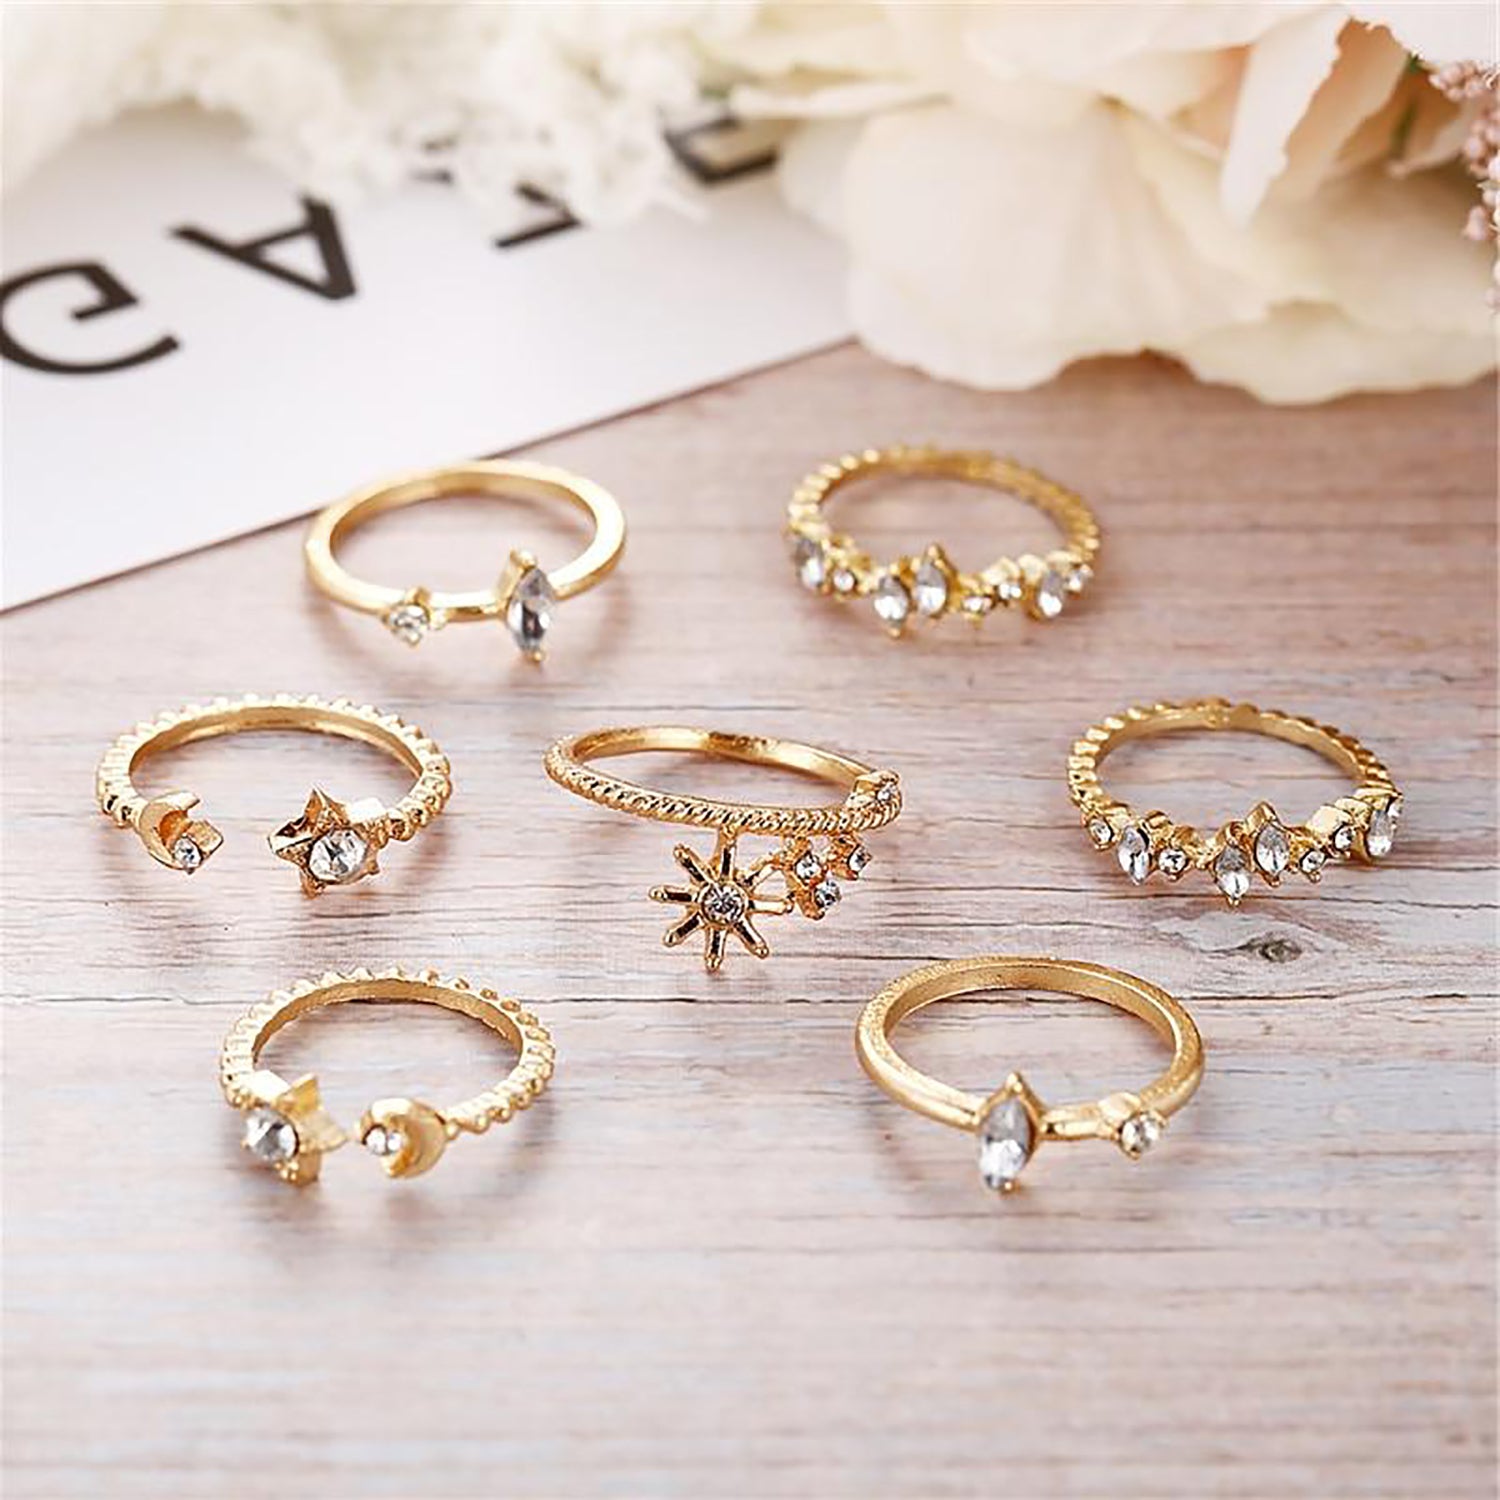 Gamma Cute Moon Star Flower Stackable Midi 7 Pieces Gold Rings Set ...